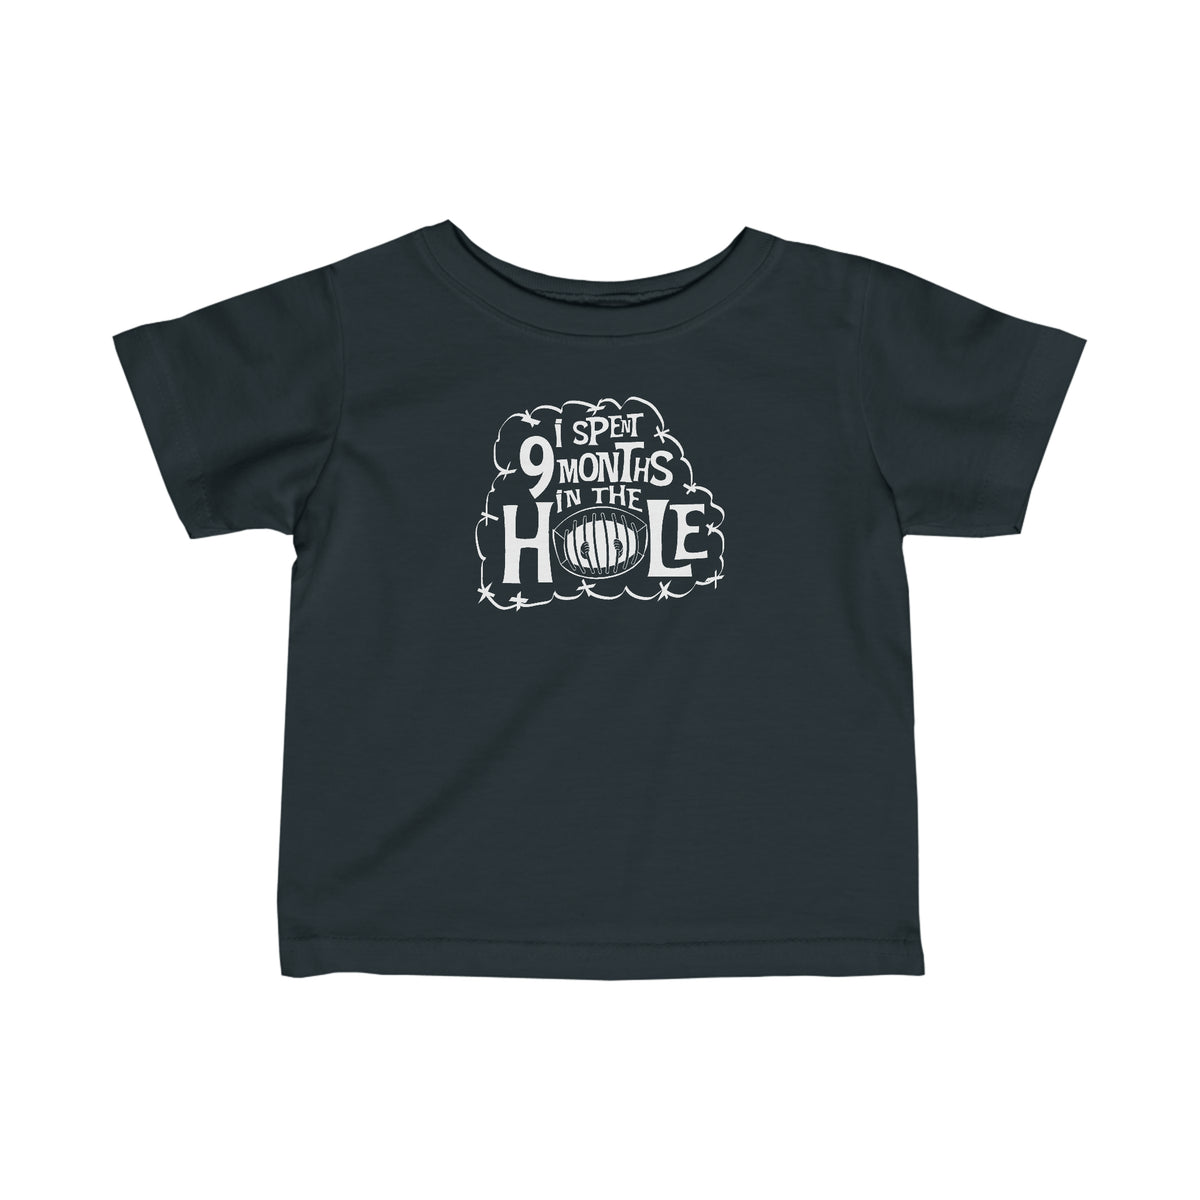 I Spent 9 Months In The Hole - Baby T-Shirt